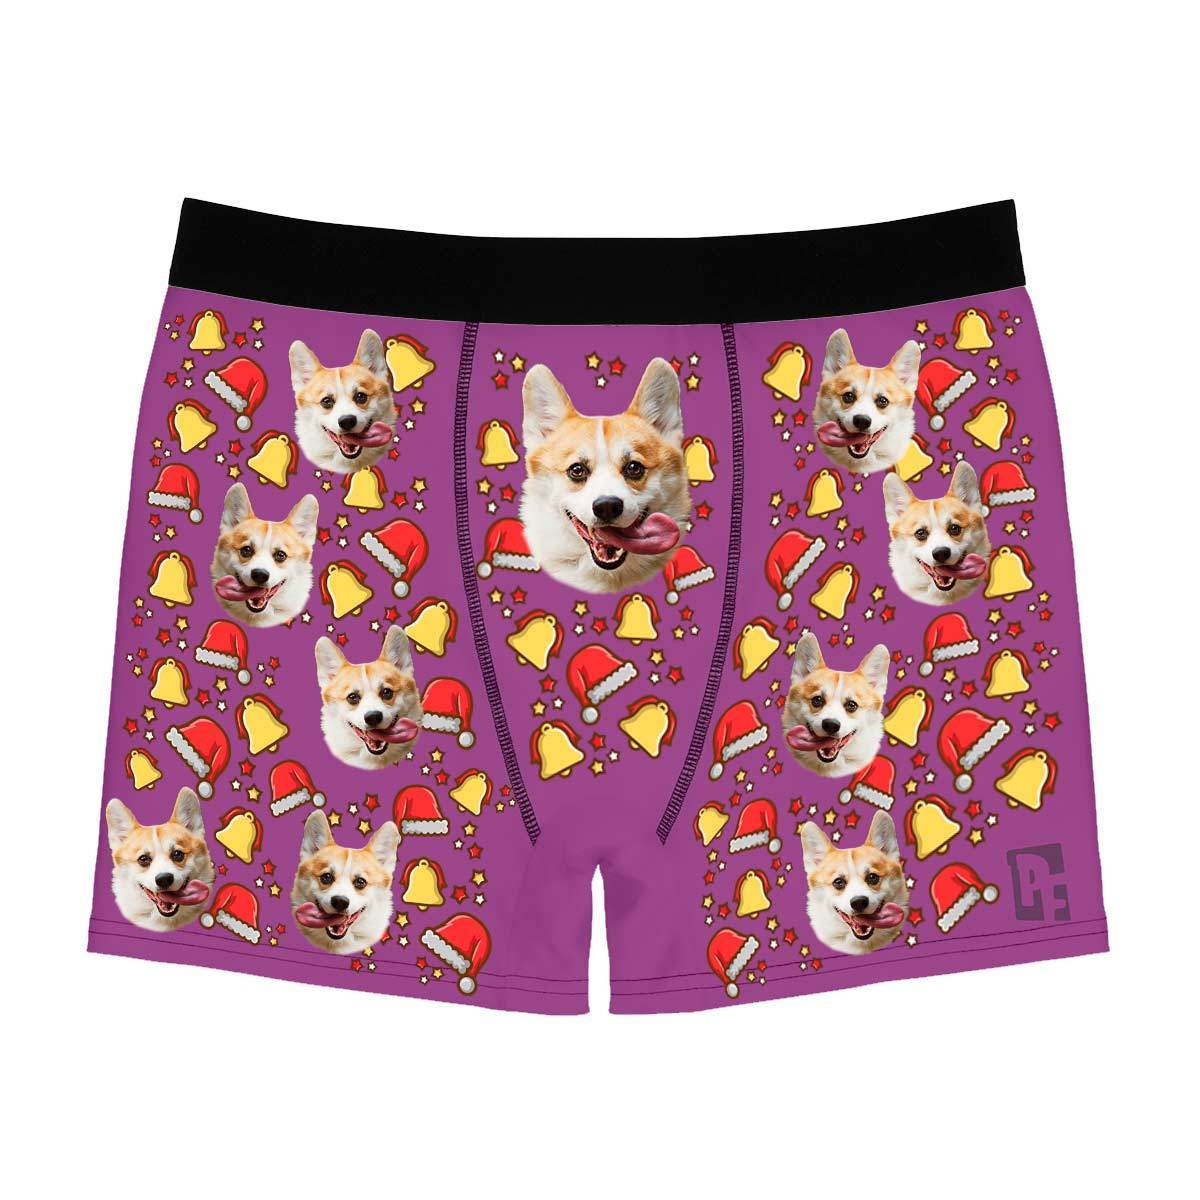 Purple Santa's hat men's boxer briefs personalized with photo printed on them